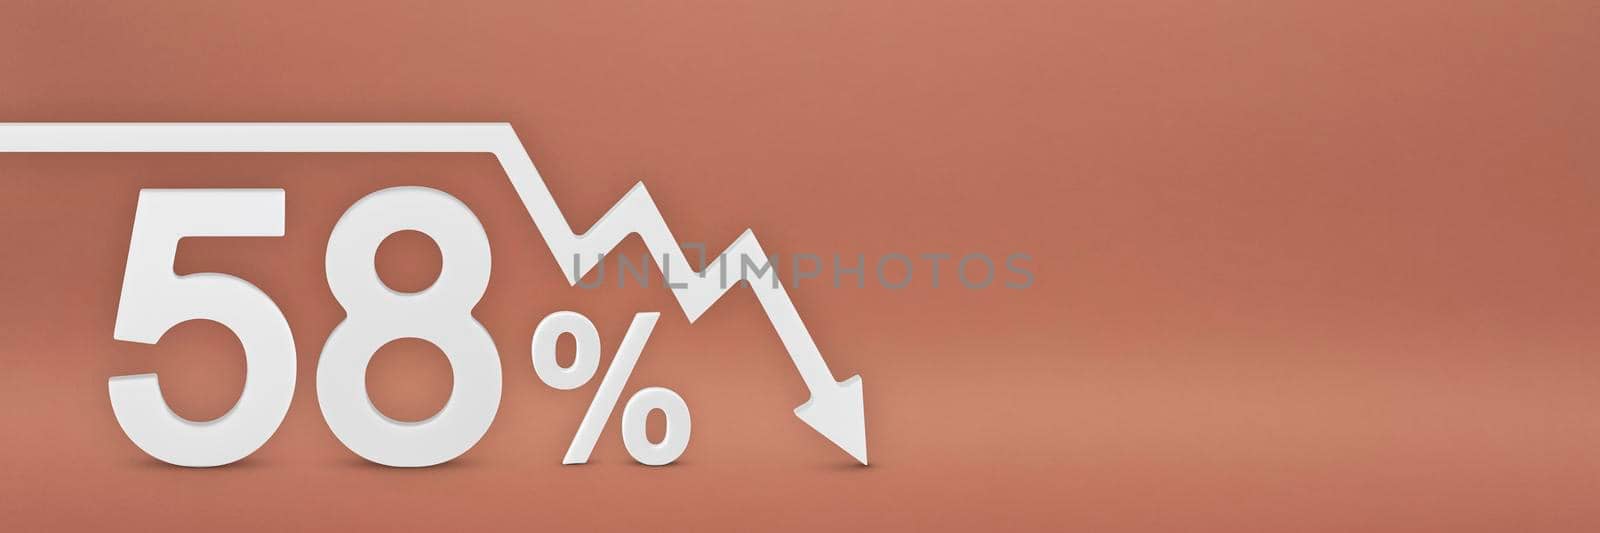 fifty-eight percent, the arrow on the graph is pointing down. Stock market crash, bear market, inflation.Economic collapse, collapse of stocks.3d banner,58 percent discount sign on a red background. by SERSOL